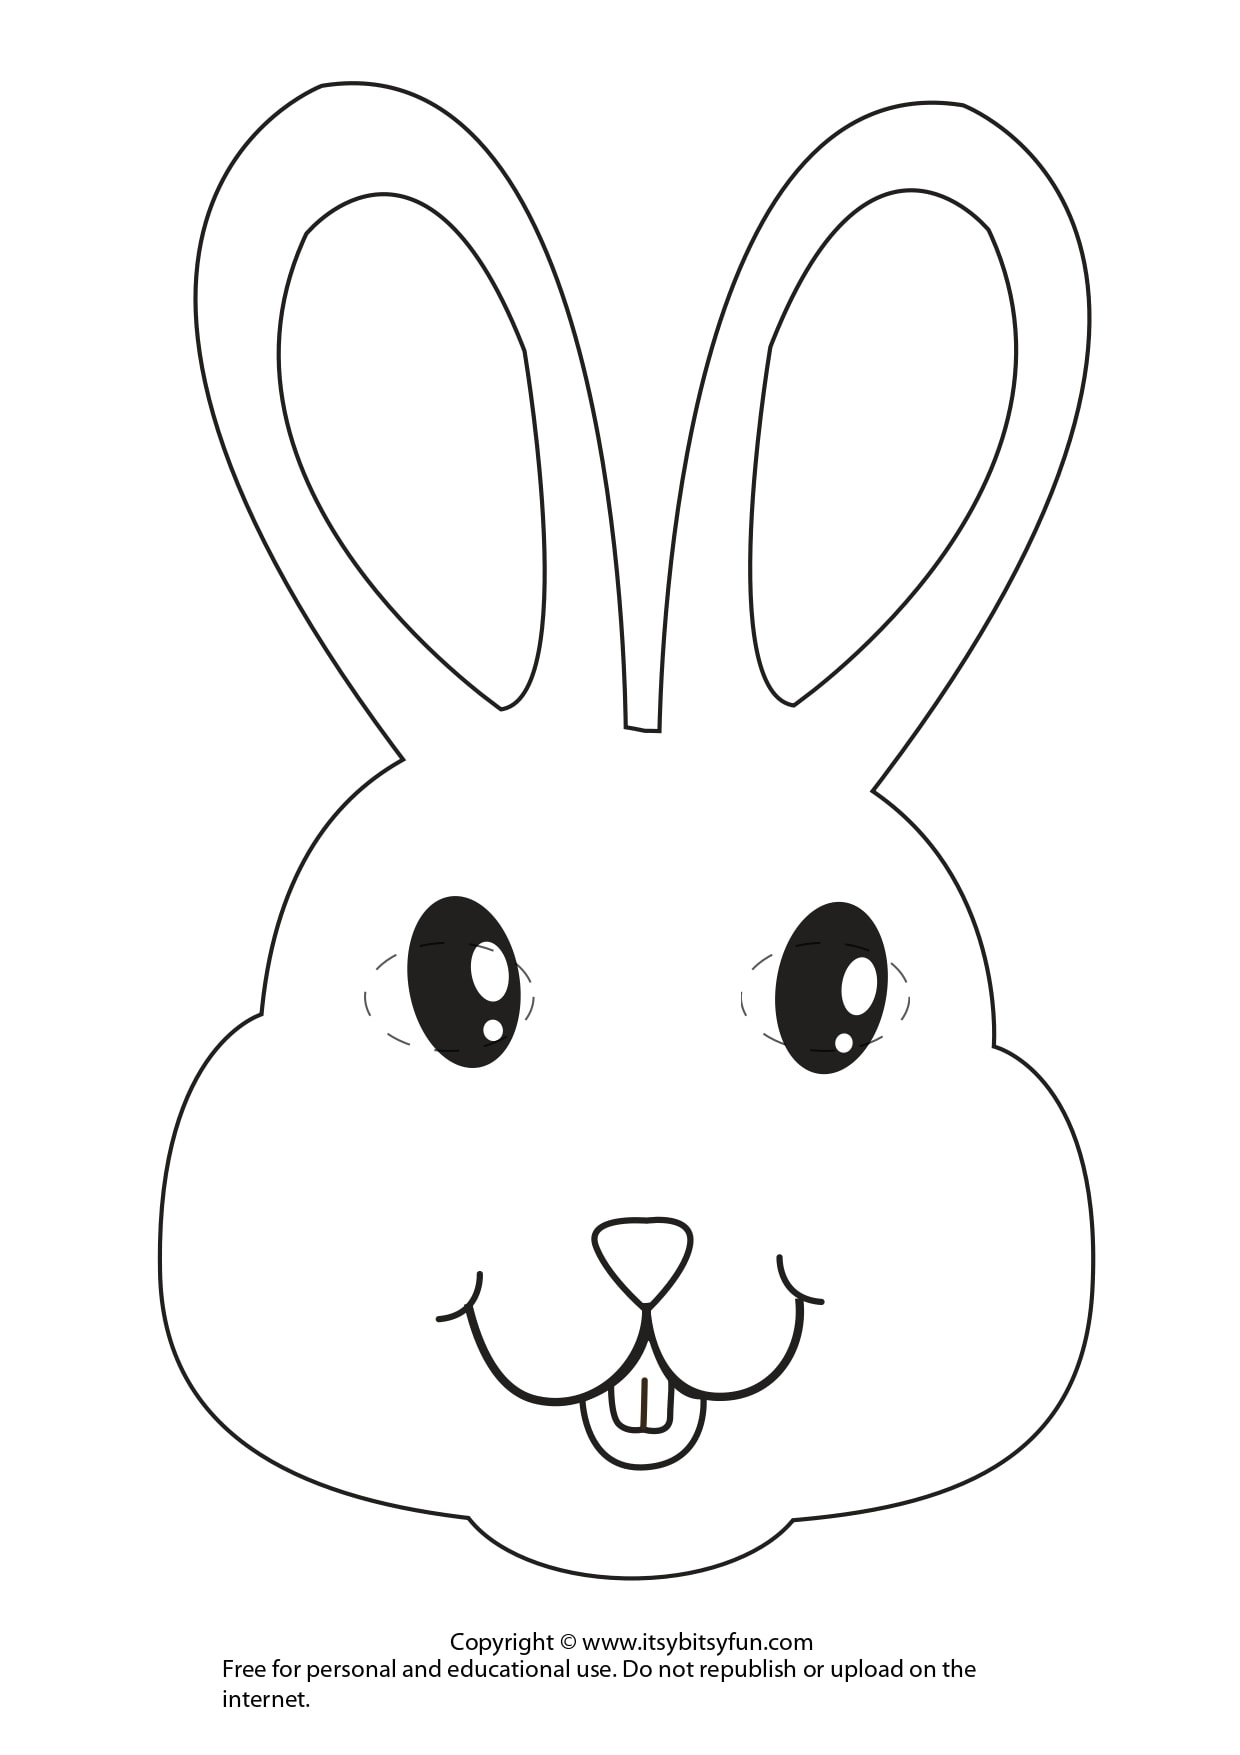 Easter Masks - Bunny Rabbit And Chick Template - Itsy Bitsy Fun - Free Printable Bunny Templates